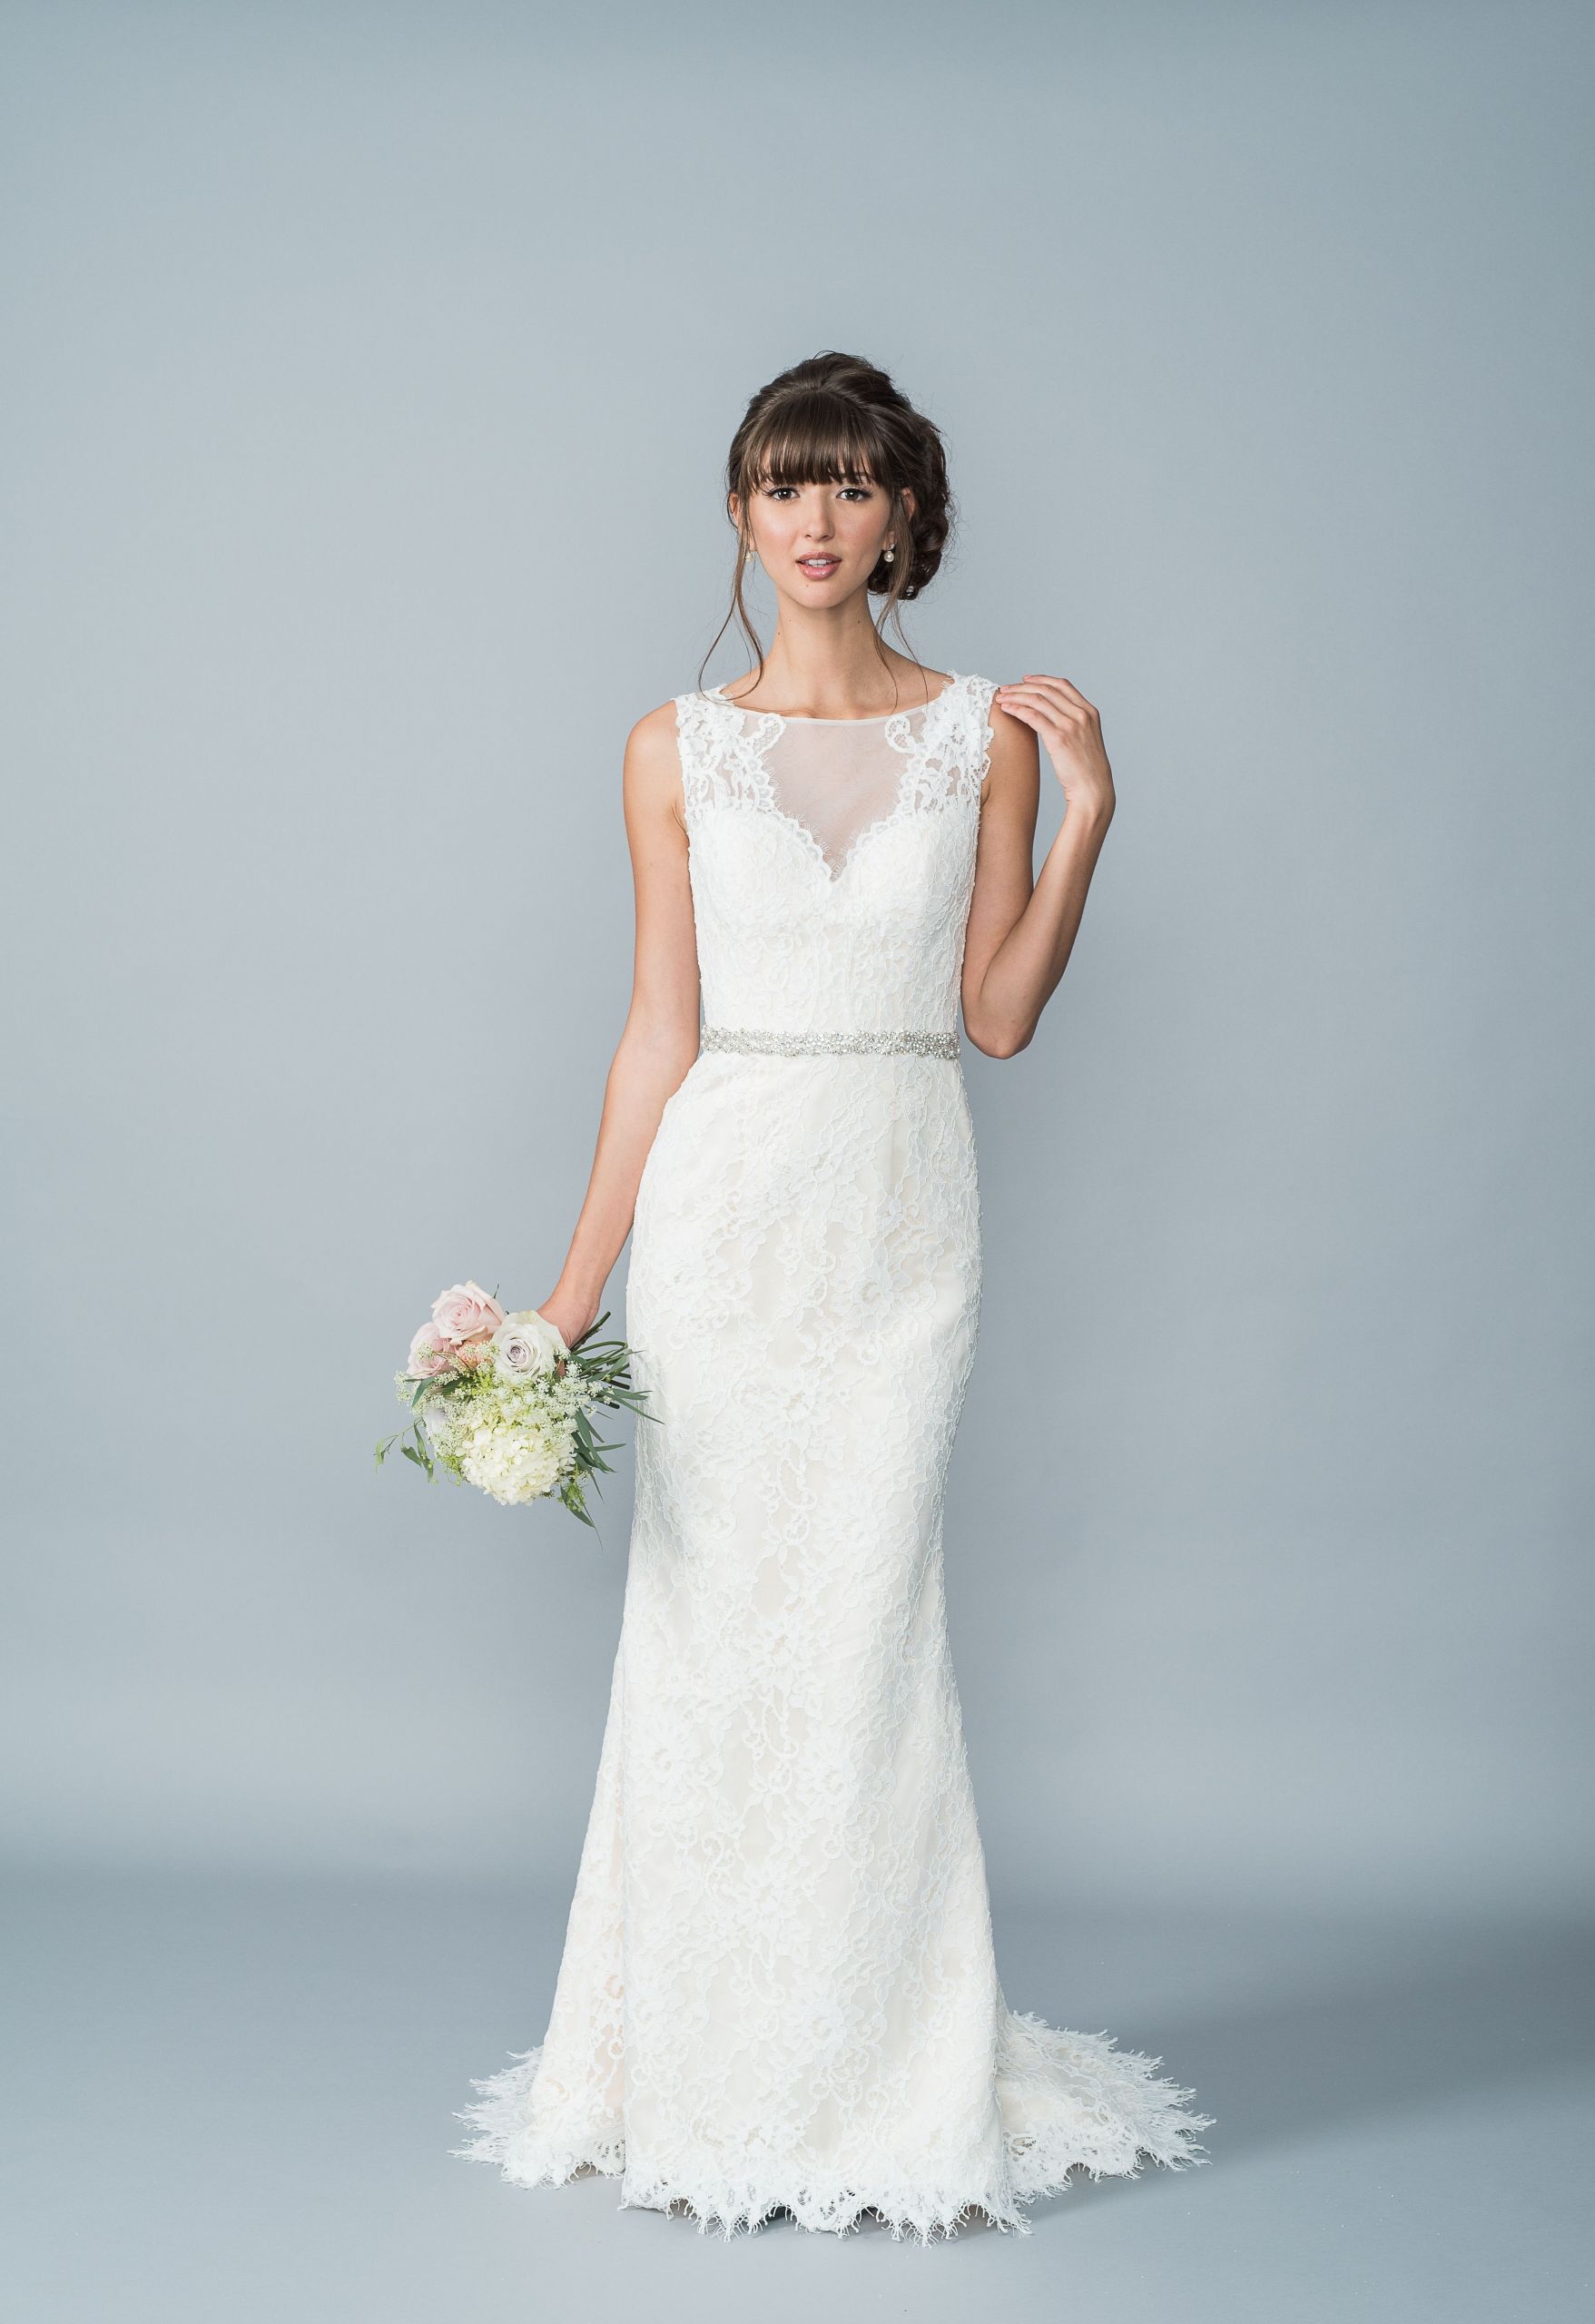 Wedding Dress Consignment Shops
 54 Lovely Consignment Shops that Buy Wedding Dresses Pics